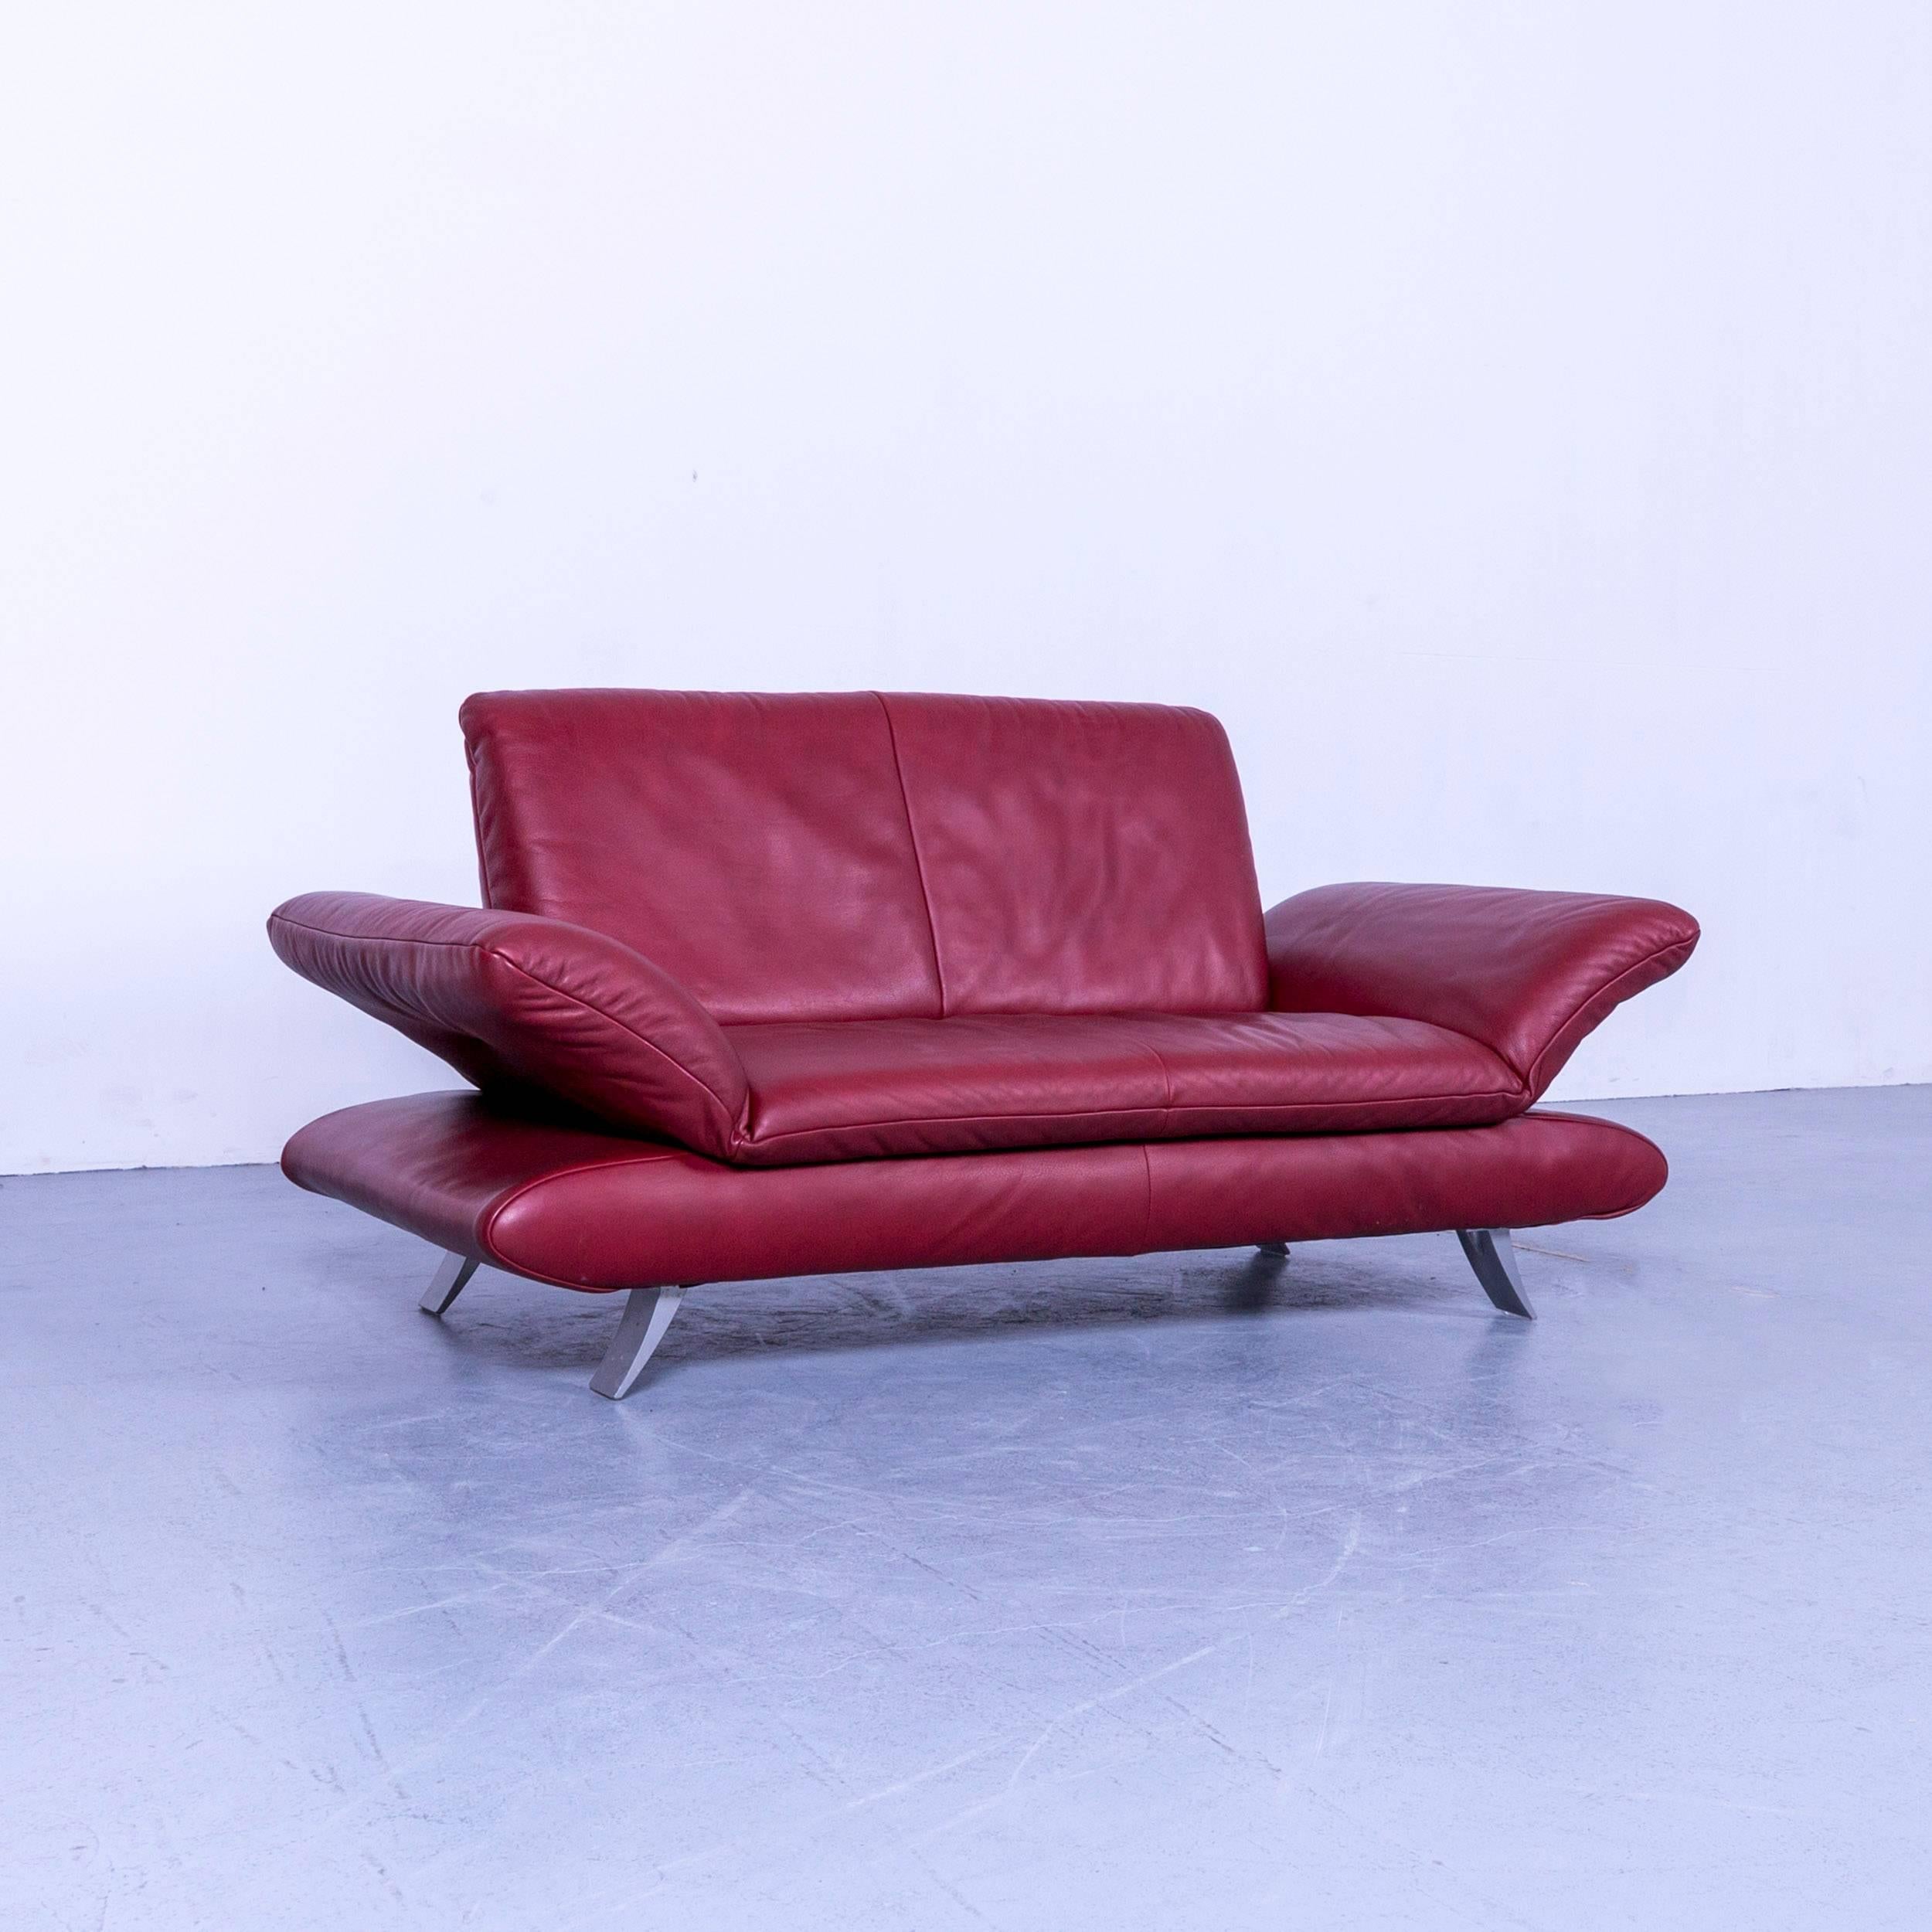 We bring to you an Koinor Rossini leather armchair red two-seat.

















       